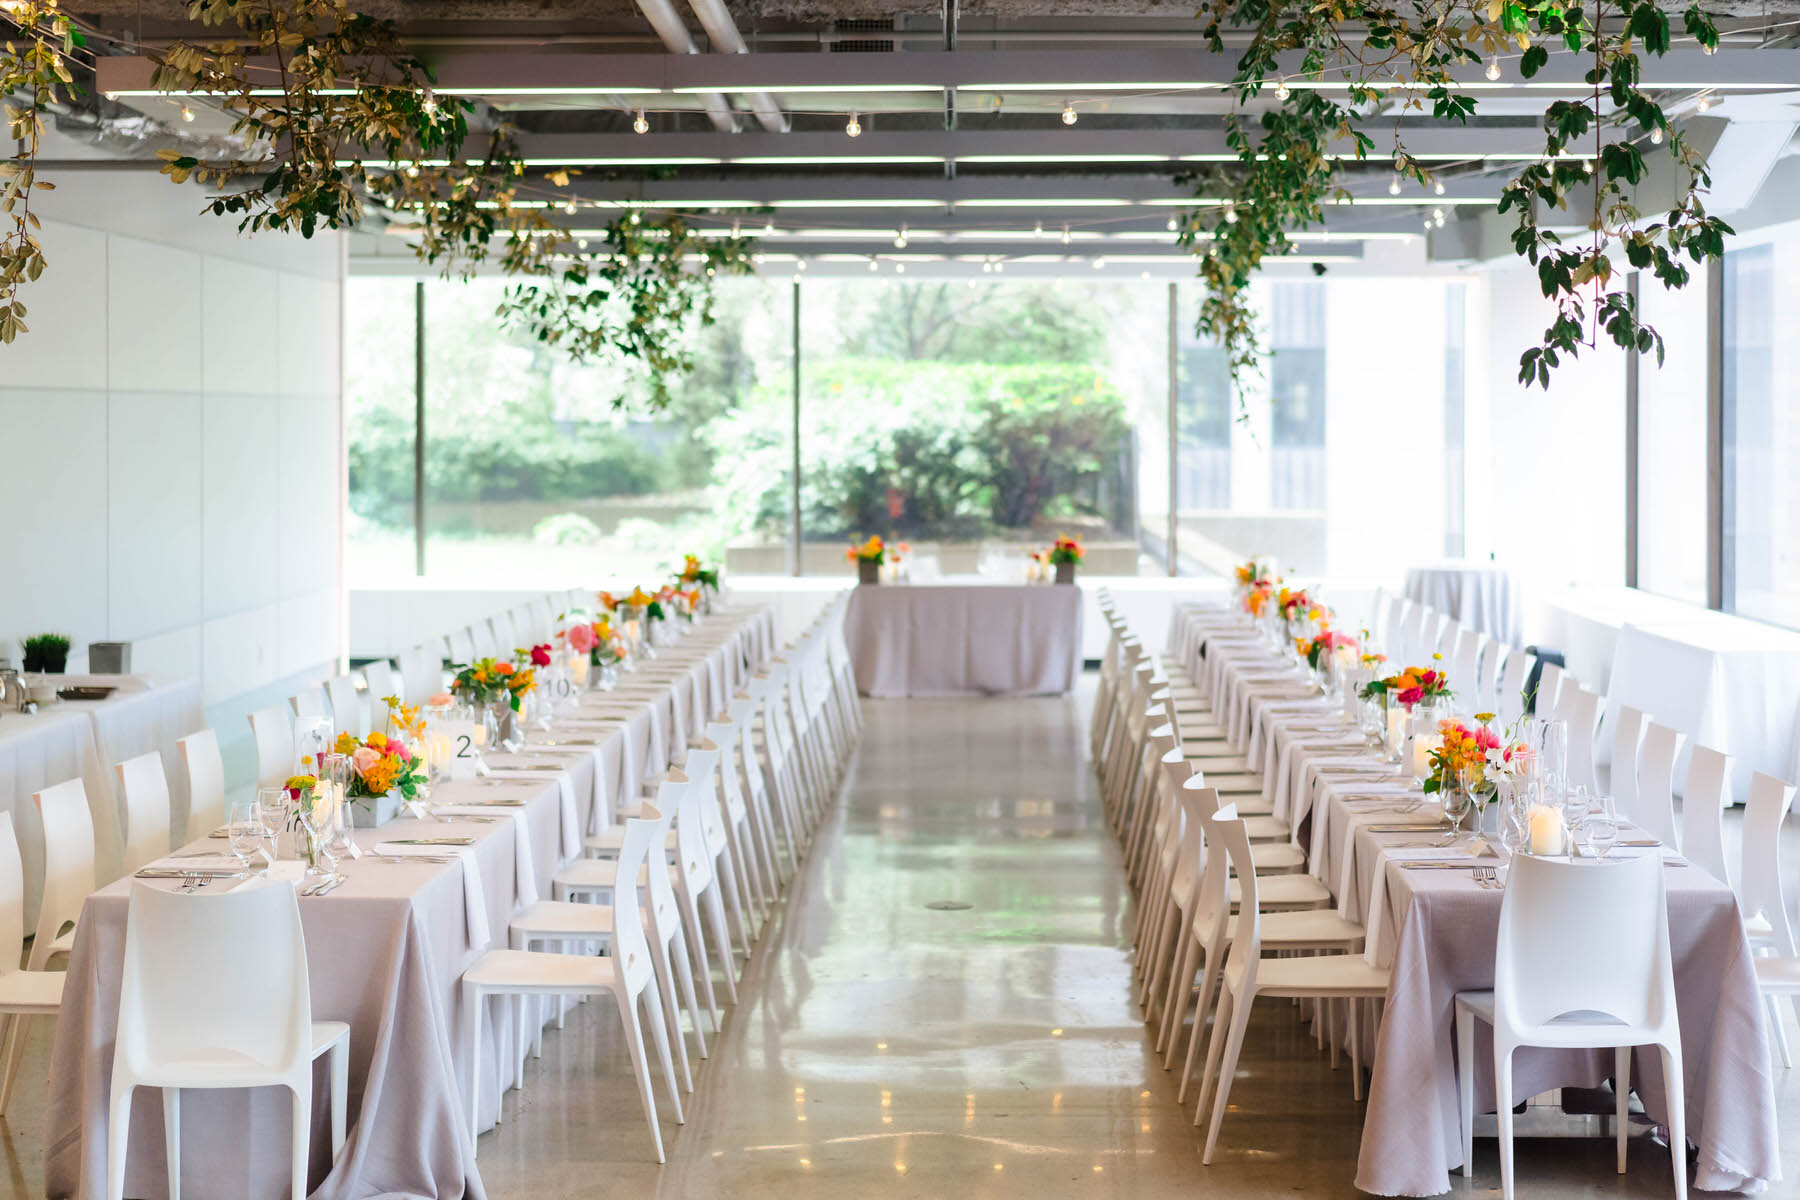 a long table with white chairs and white tablecloths.